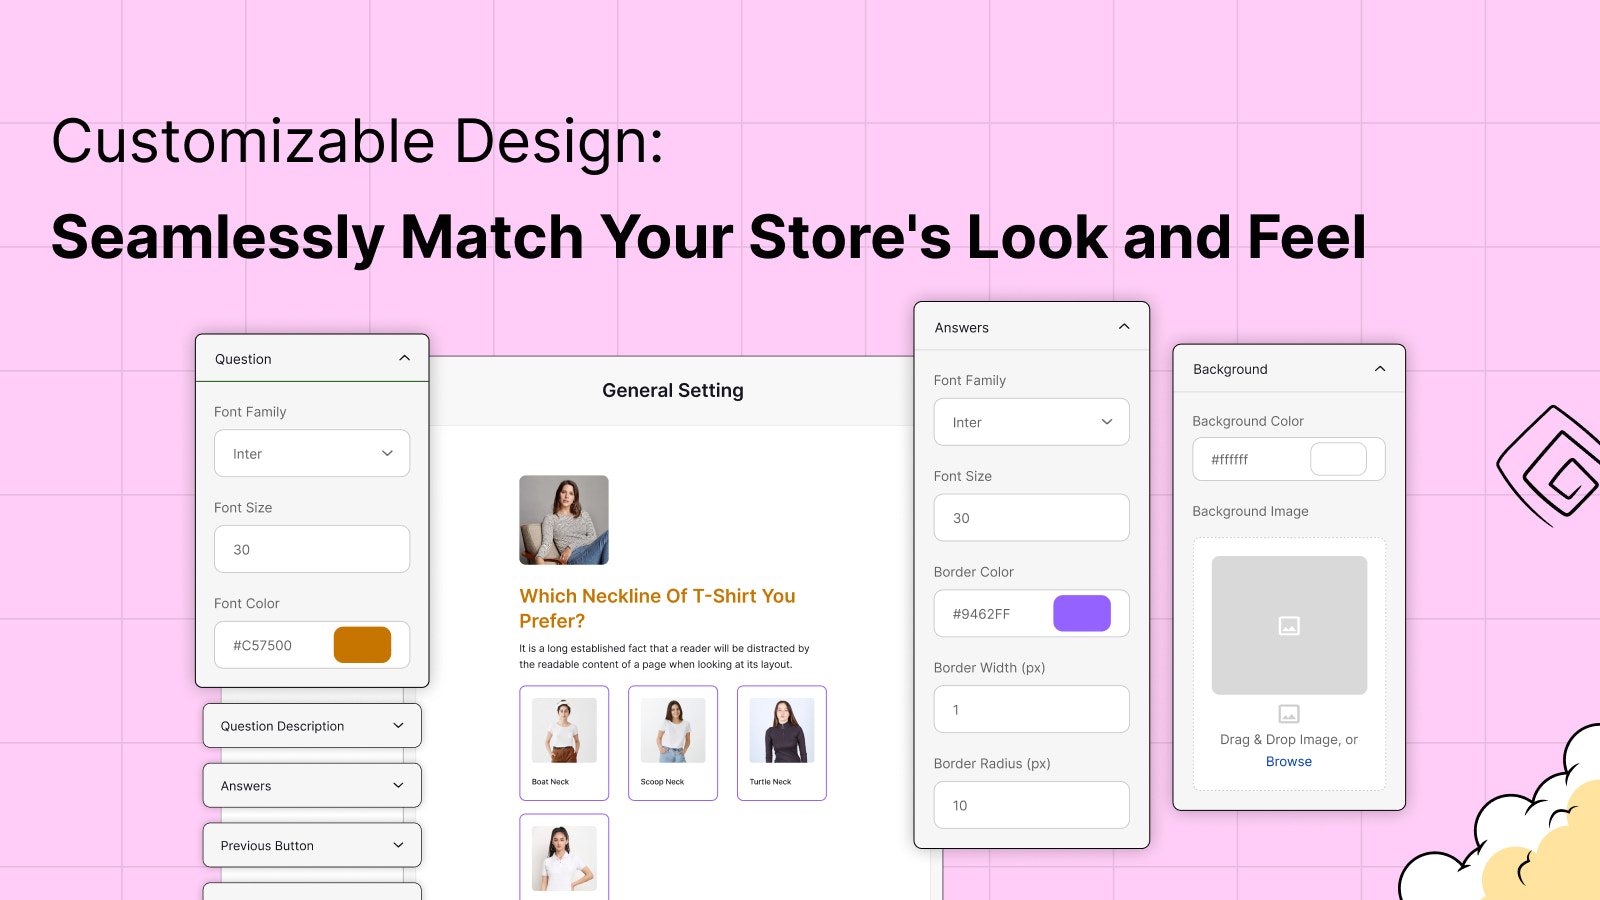 Customizable Design: Seamlessly Match Your Store's Look and Feel